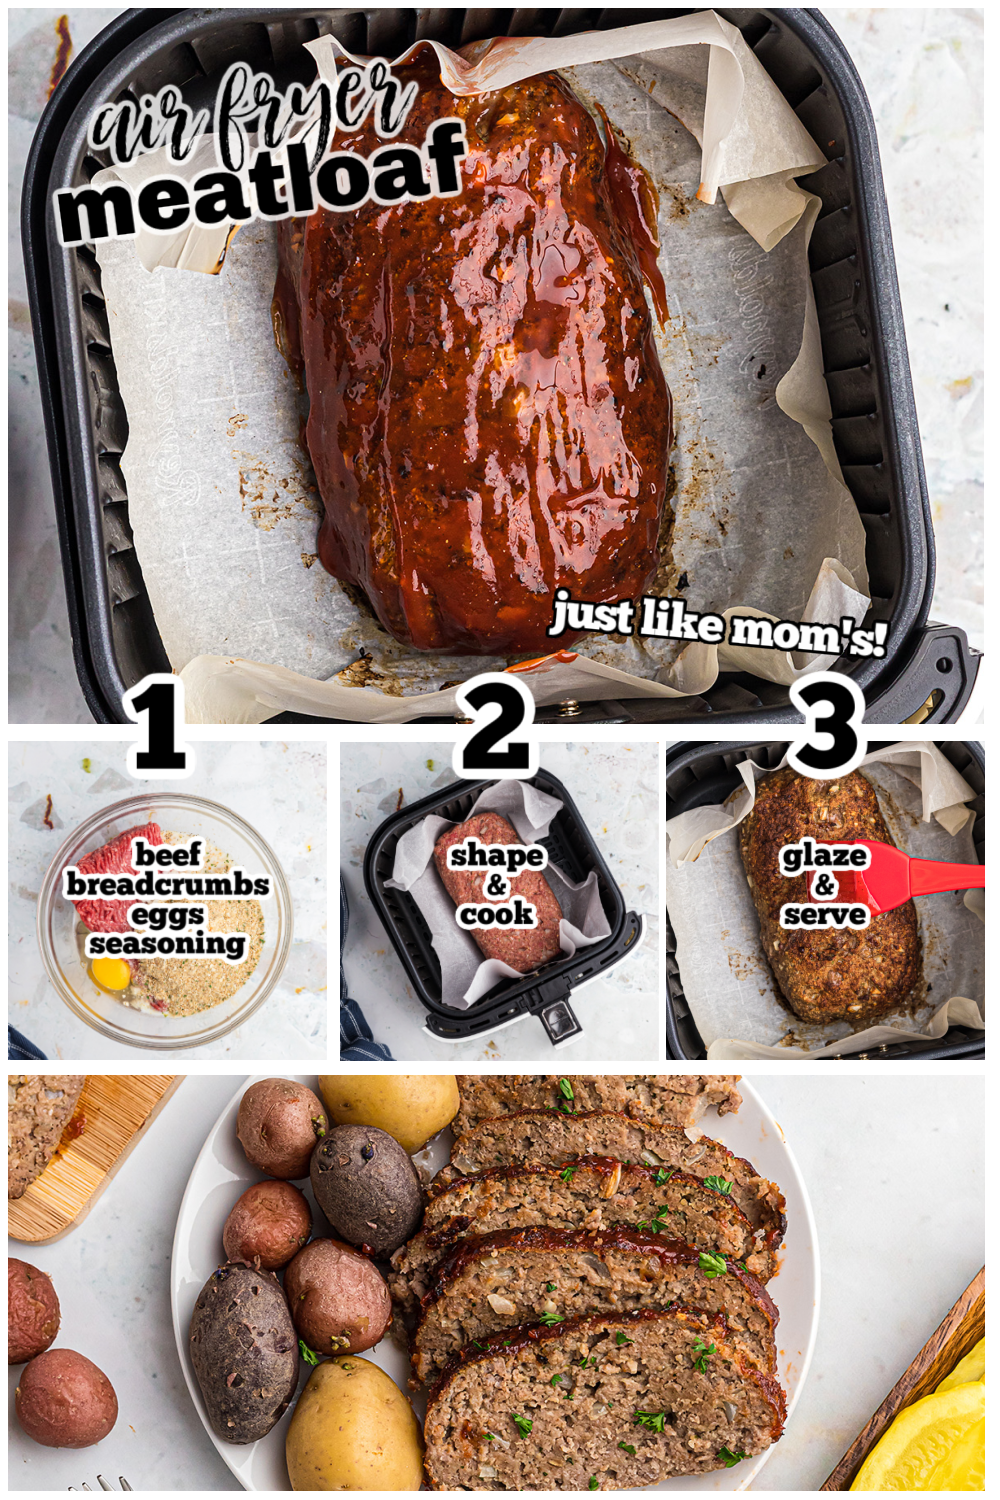 This meatloaf recipe is a great main dish for your air fryer!  It cooks perfectly!  #airfried #meatloaf #recipes